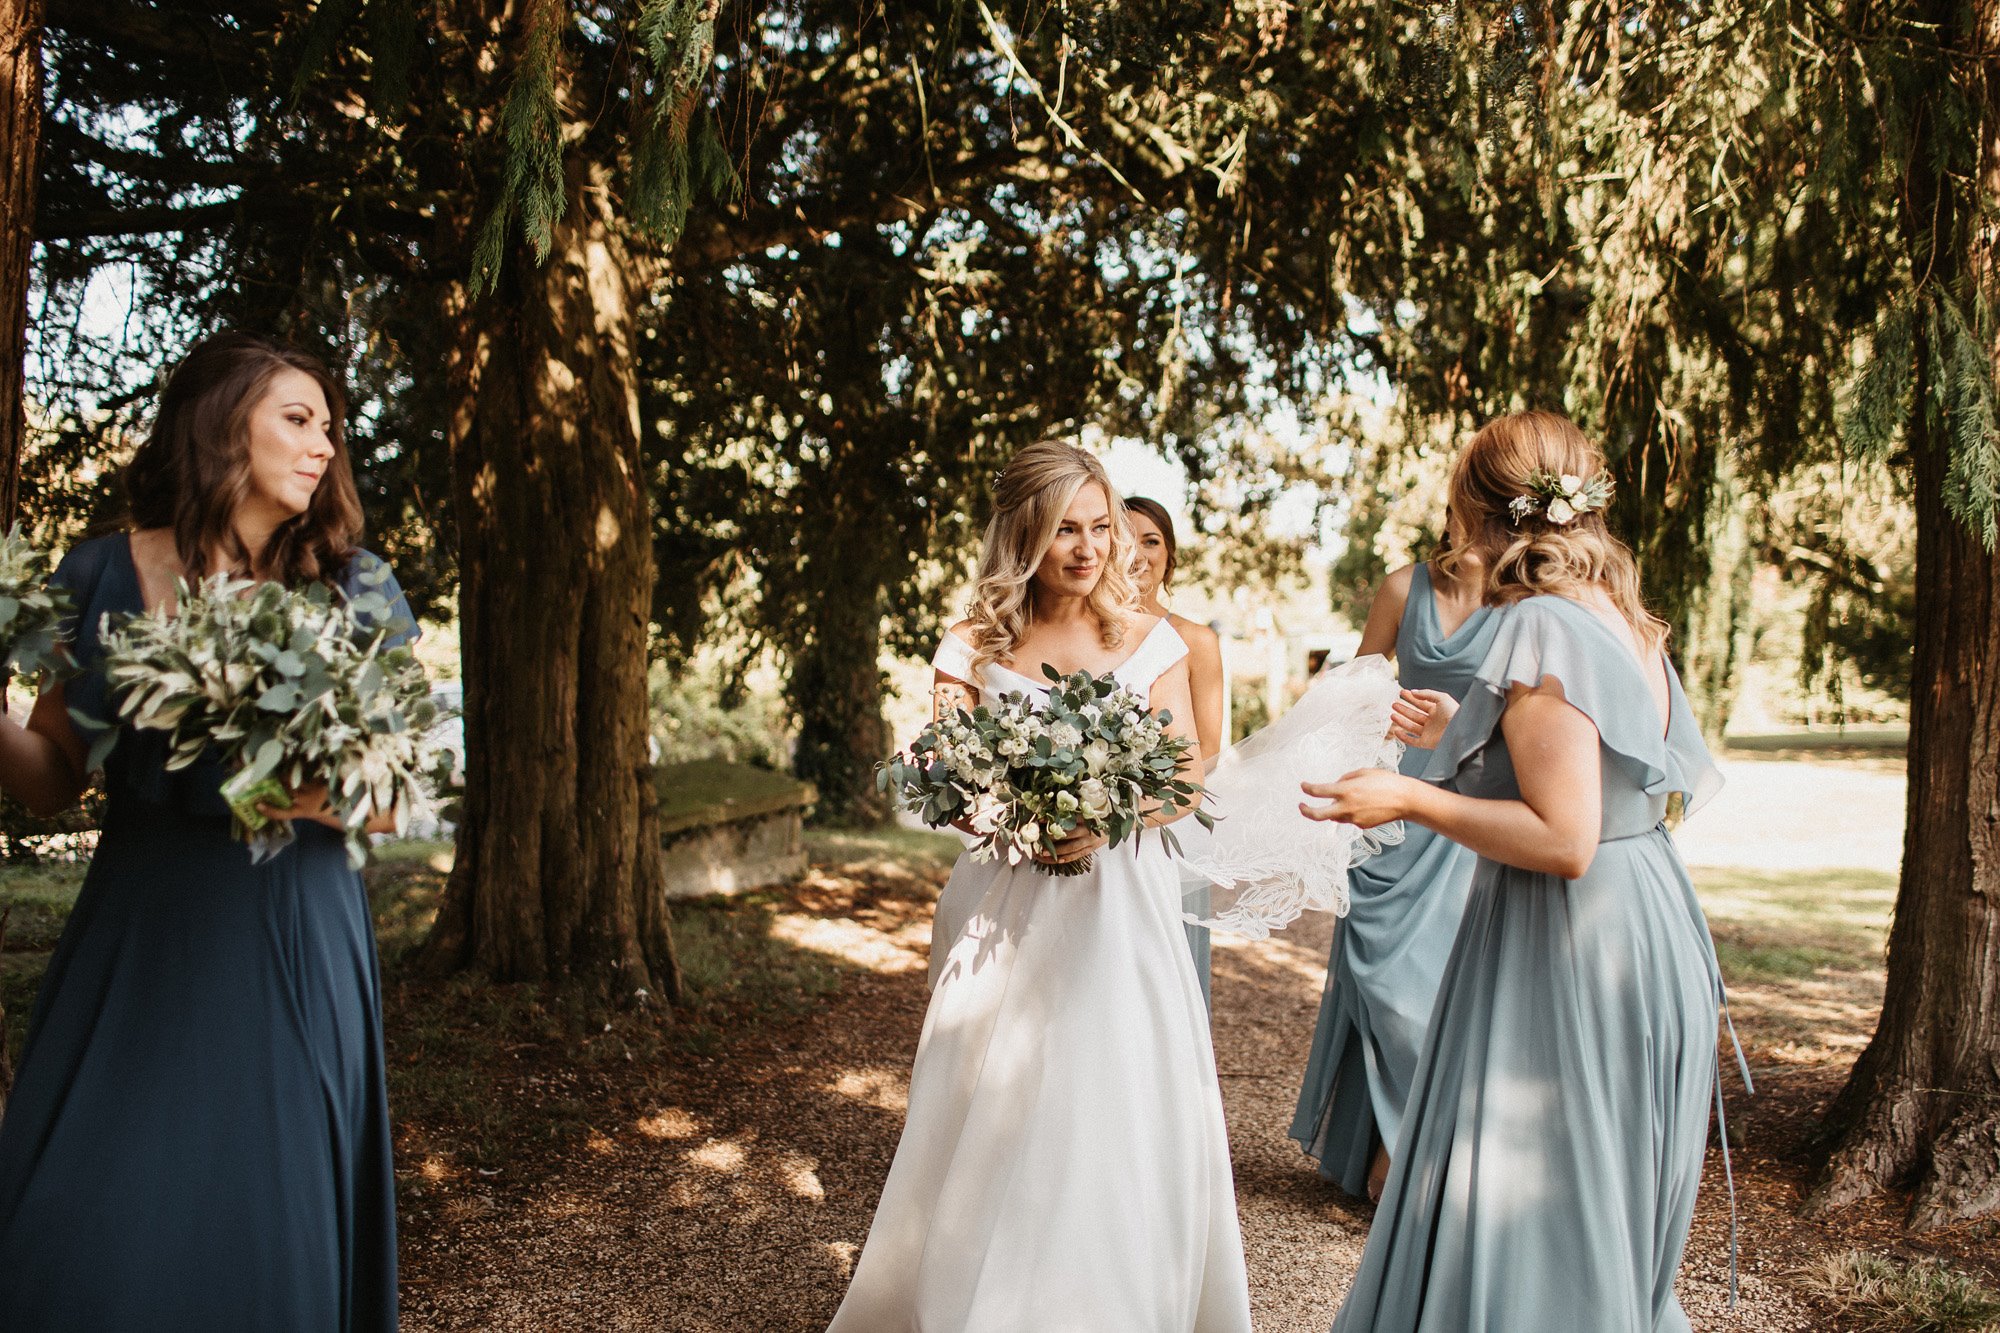 Candid wedding photo of bride with her bridesmaids in teal dresses surrounded by dappled sunshine through the trees